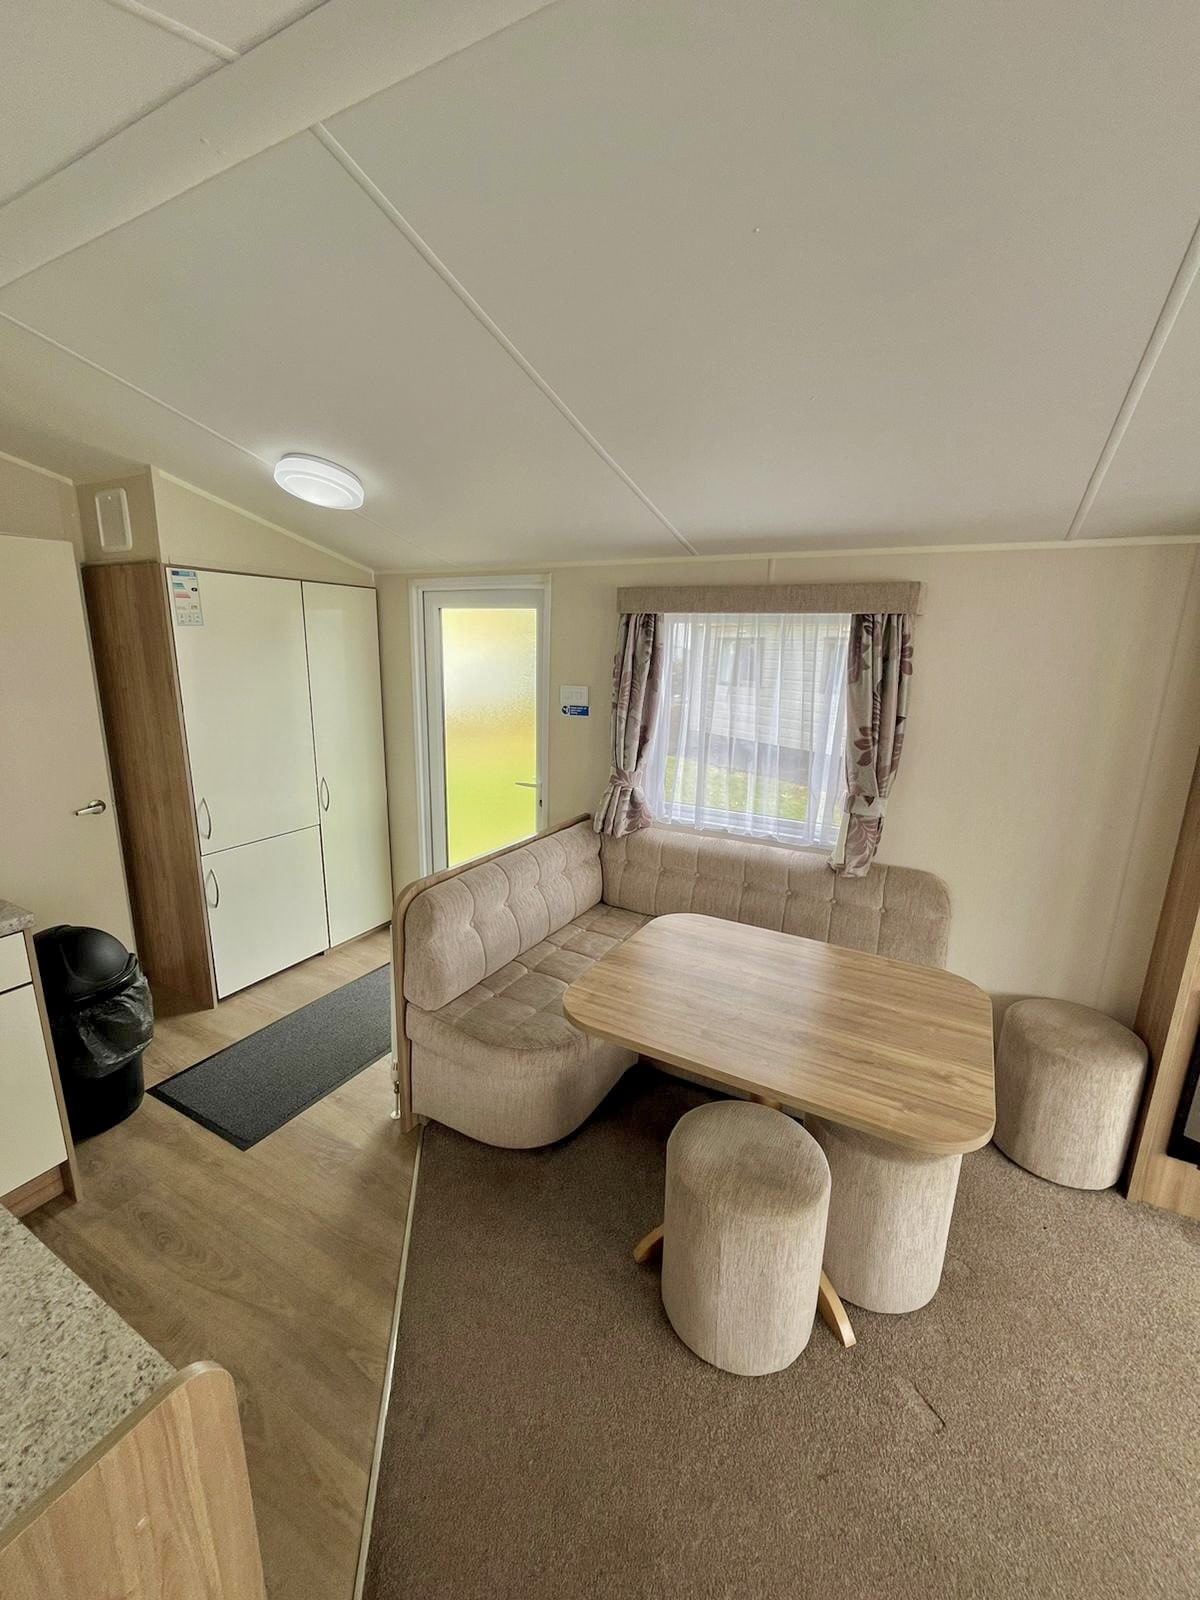 Used 2017 Willerby Rio Gold for sale at Butlins Minehead